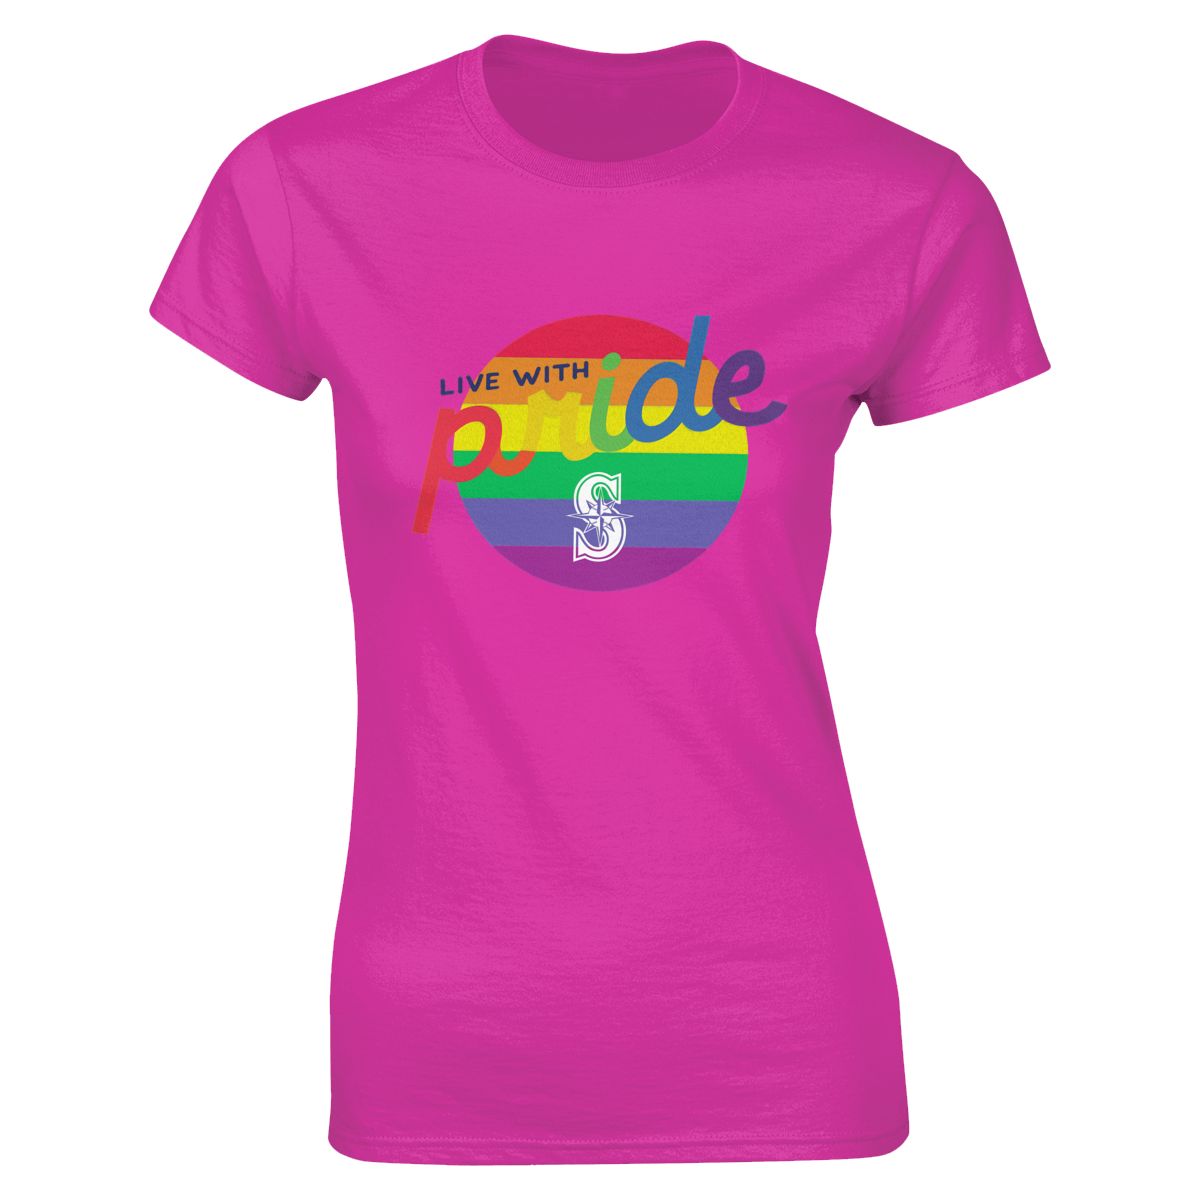 Seattle Mariners Round LGBT Lettering Women's Crewneck T-Shirt